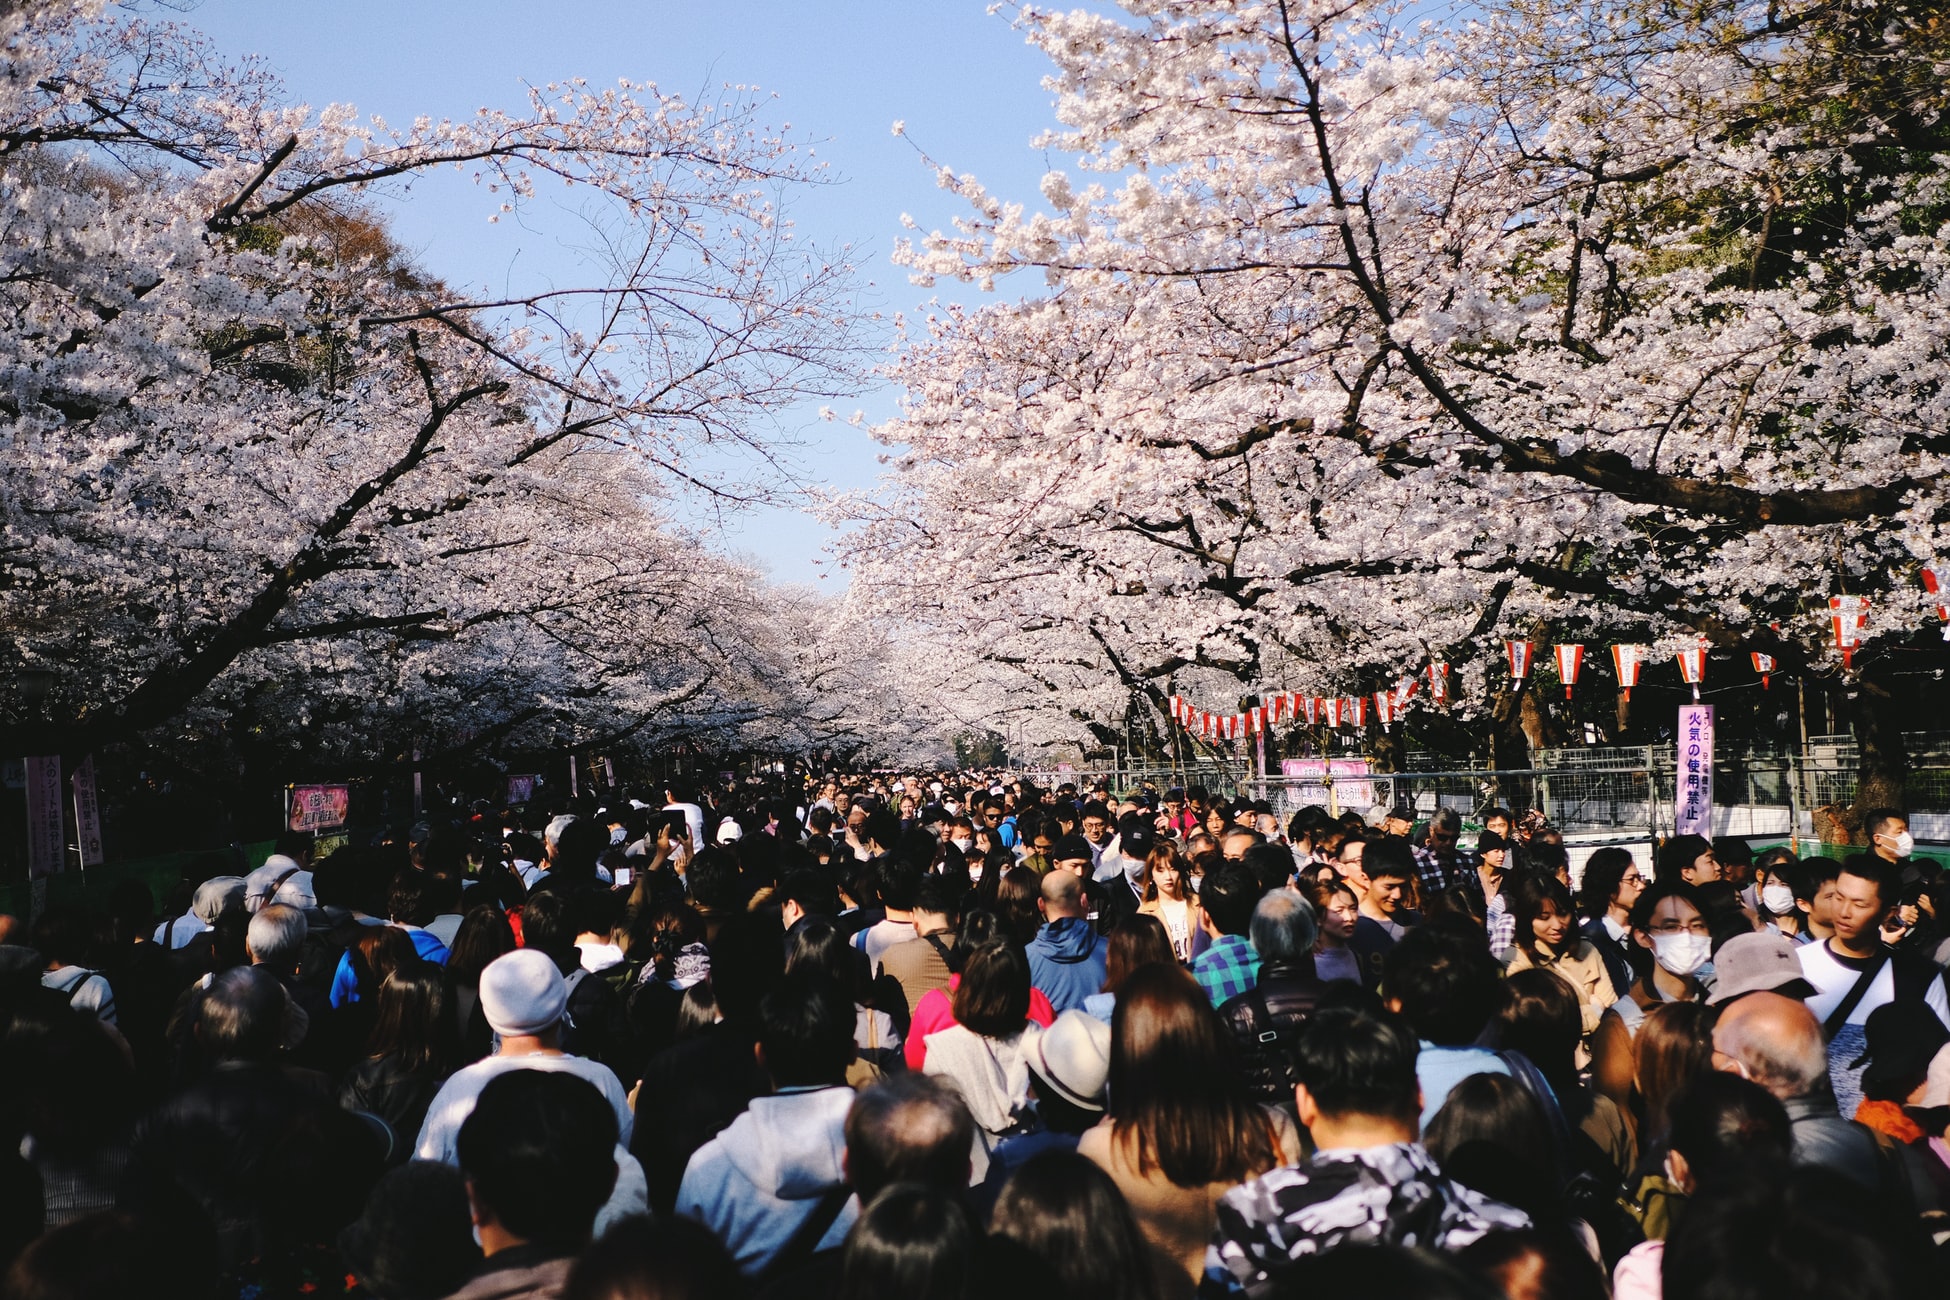 crowd at park with cherry blossoms